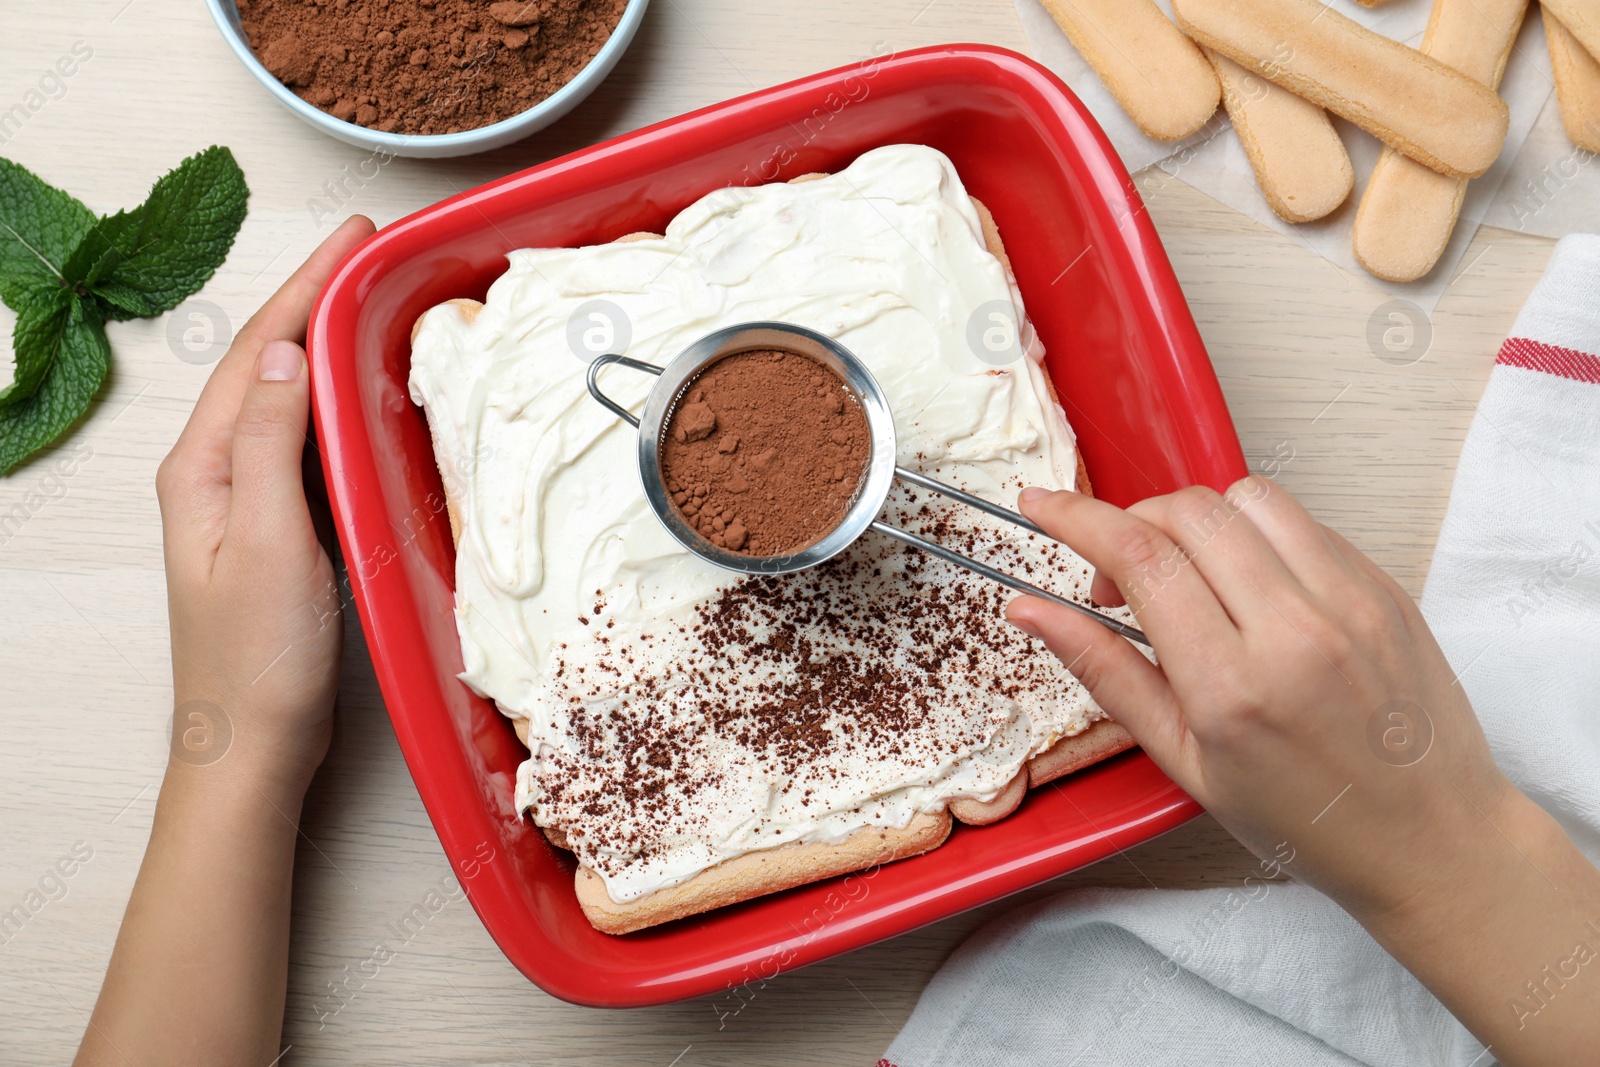 Photo of Woman pouring powdered cocoa onto tiramisu cake at wooden table, top view